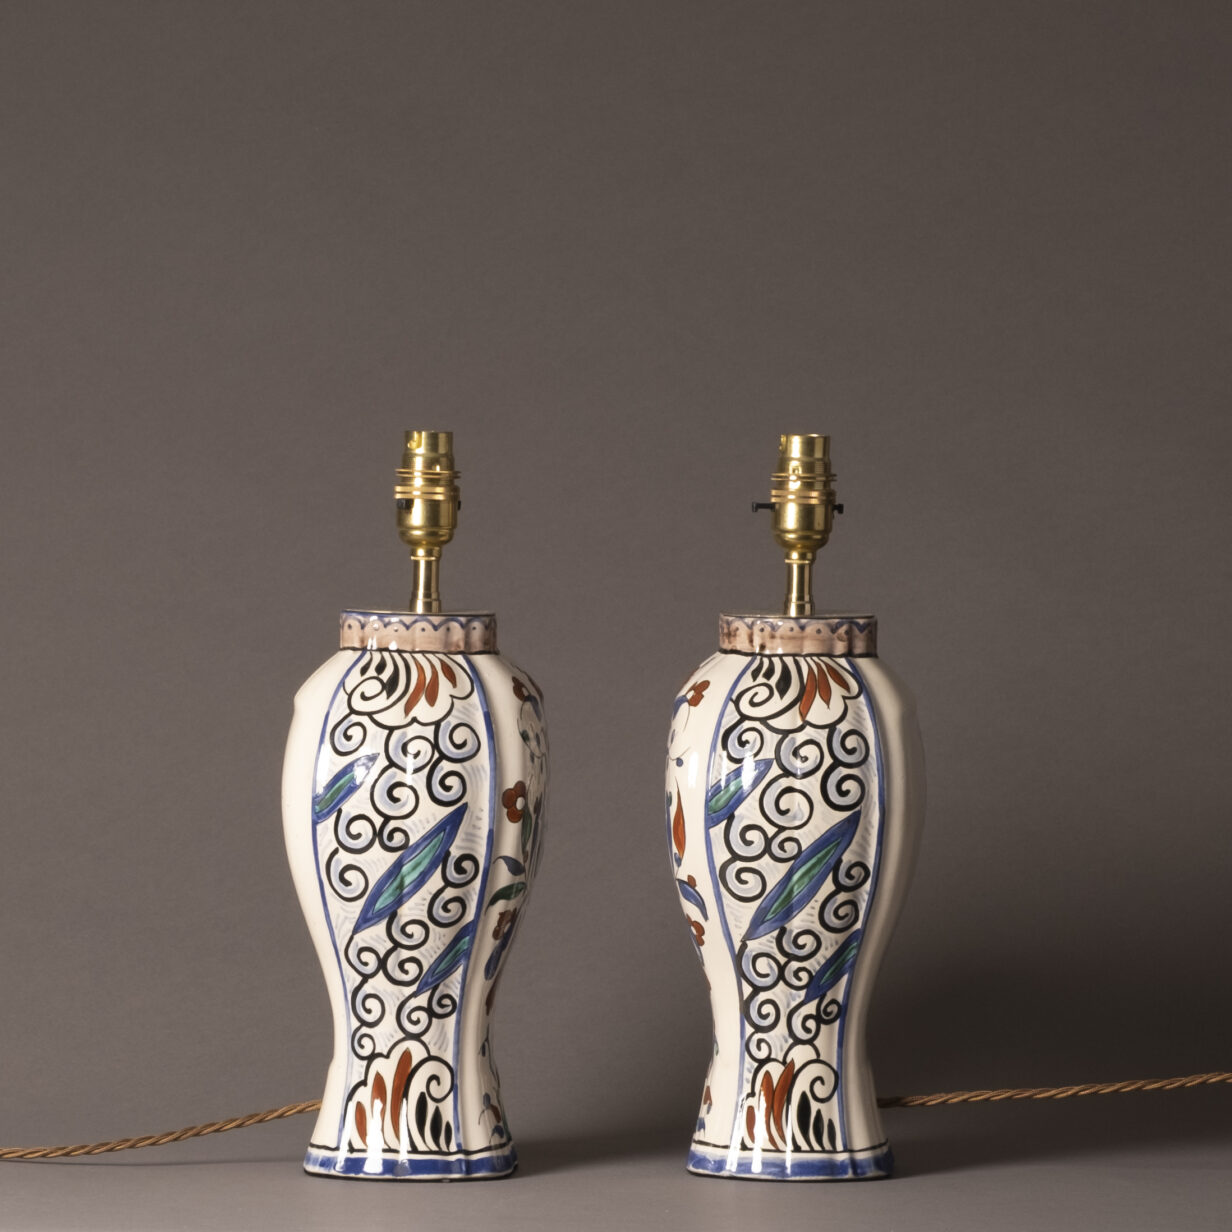 Pair of early 20th century faience vase lamps